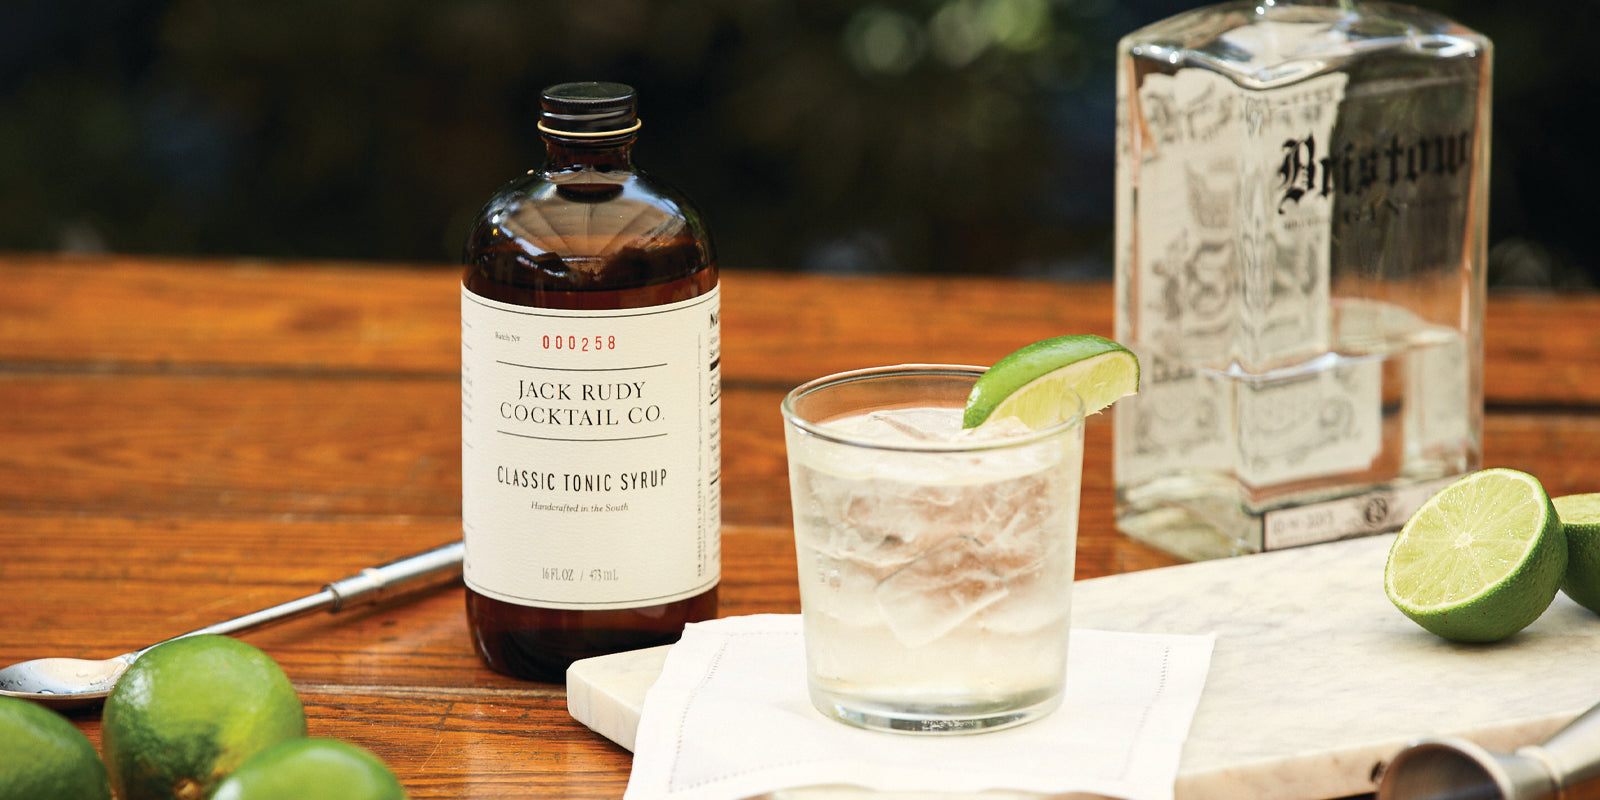 A gin and tonic made with Jack Rudy Co. Classic Tonic Syrup